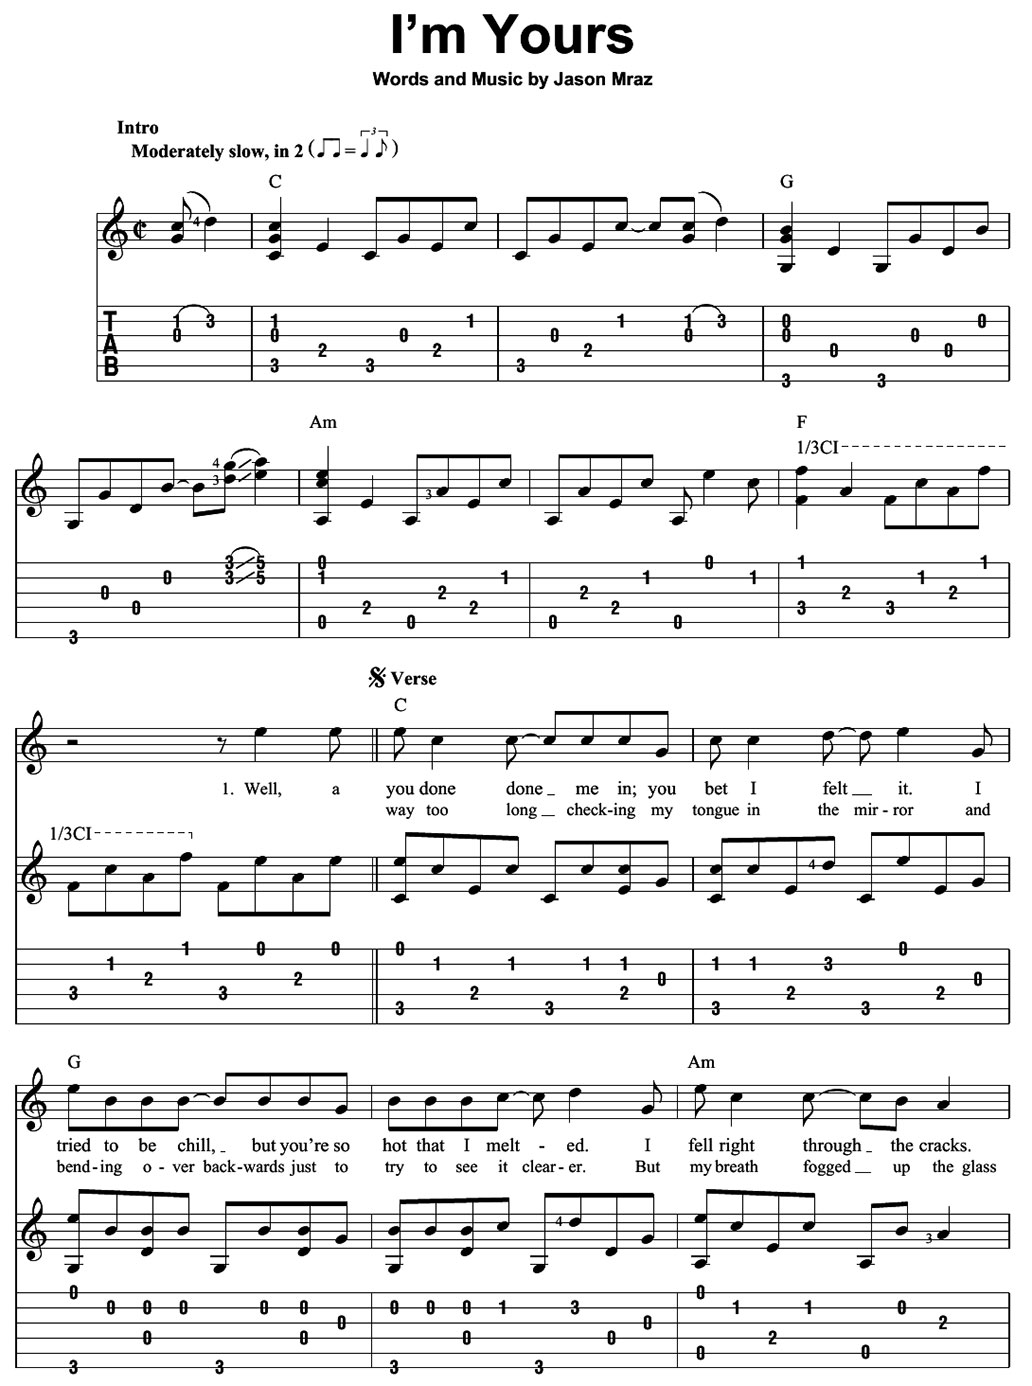 I'm yours sheet music notes